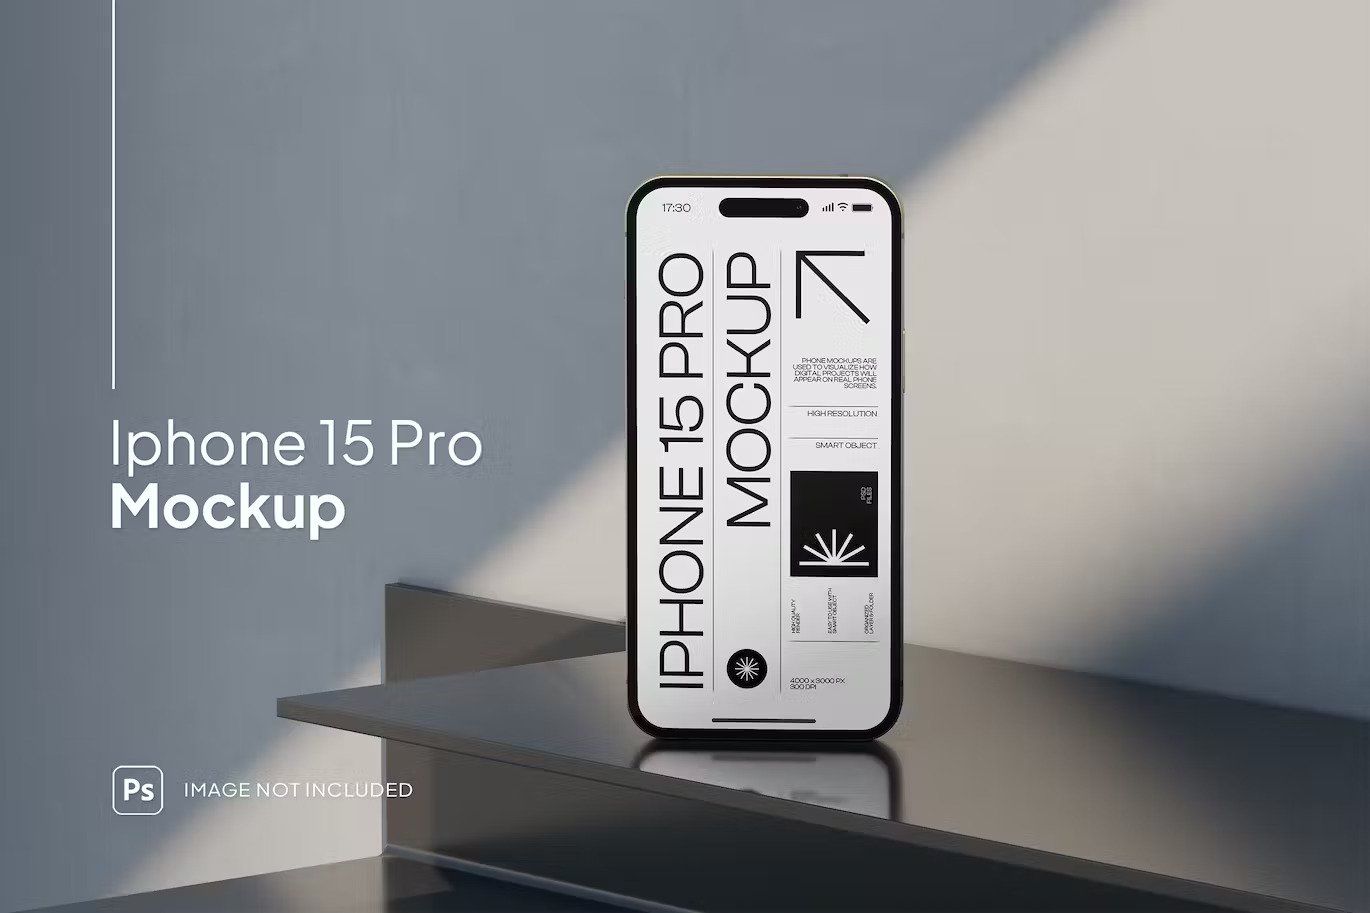 iphone 15 pro mockup with a shadow